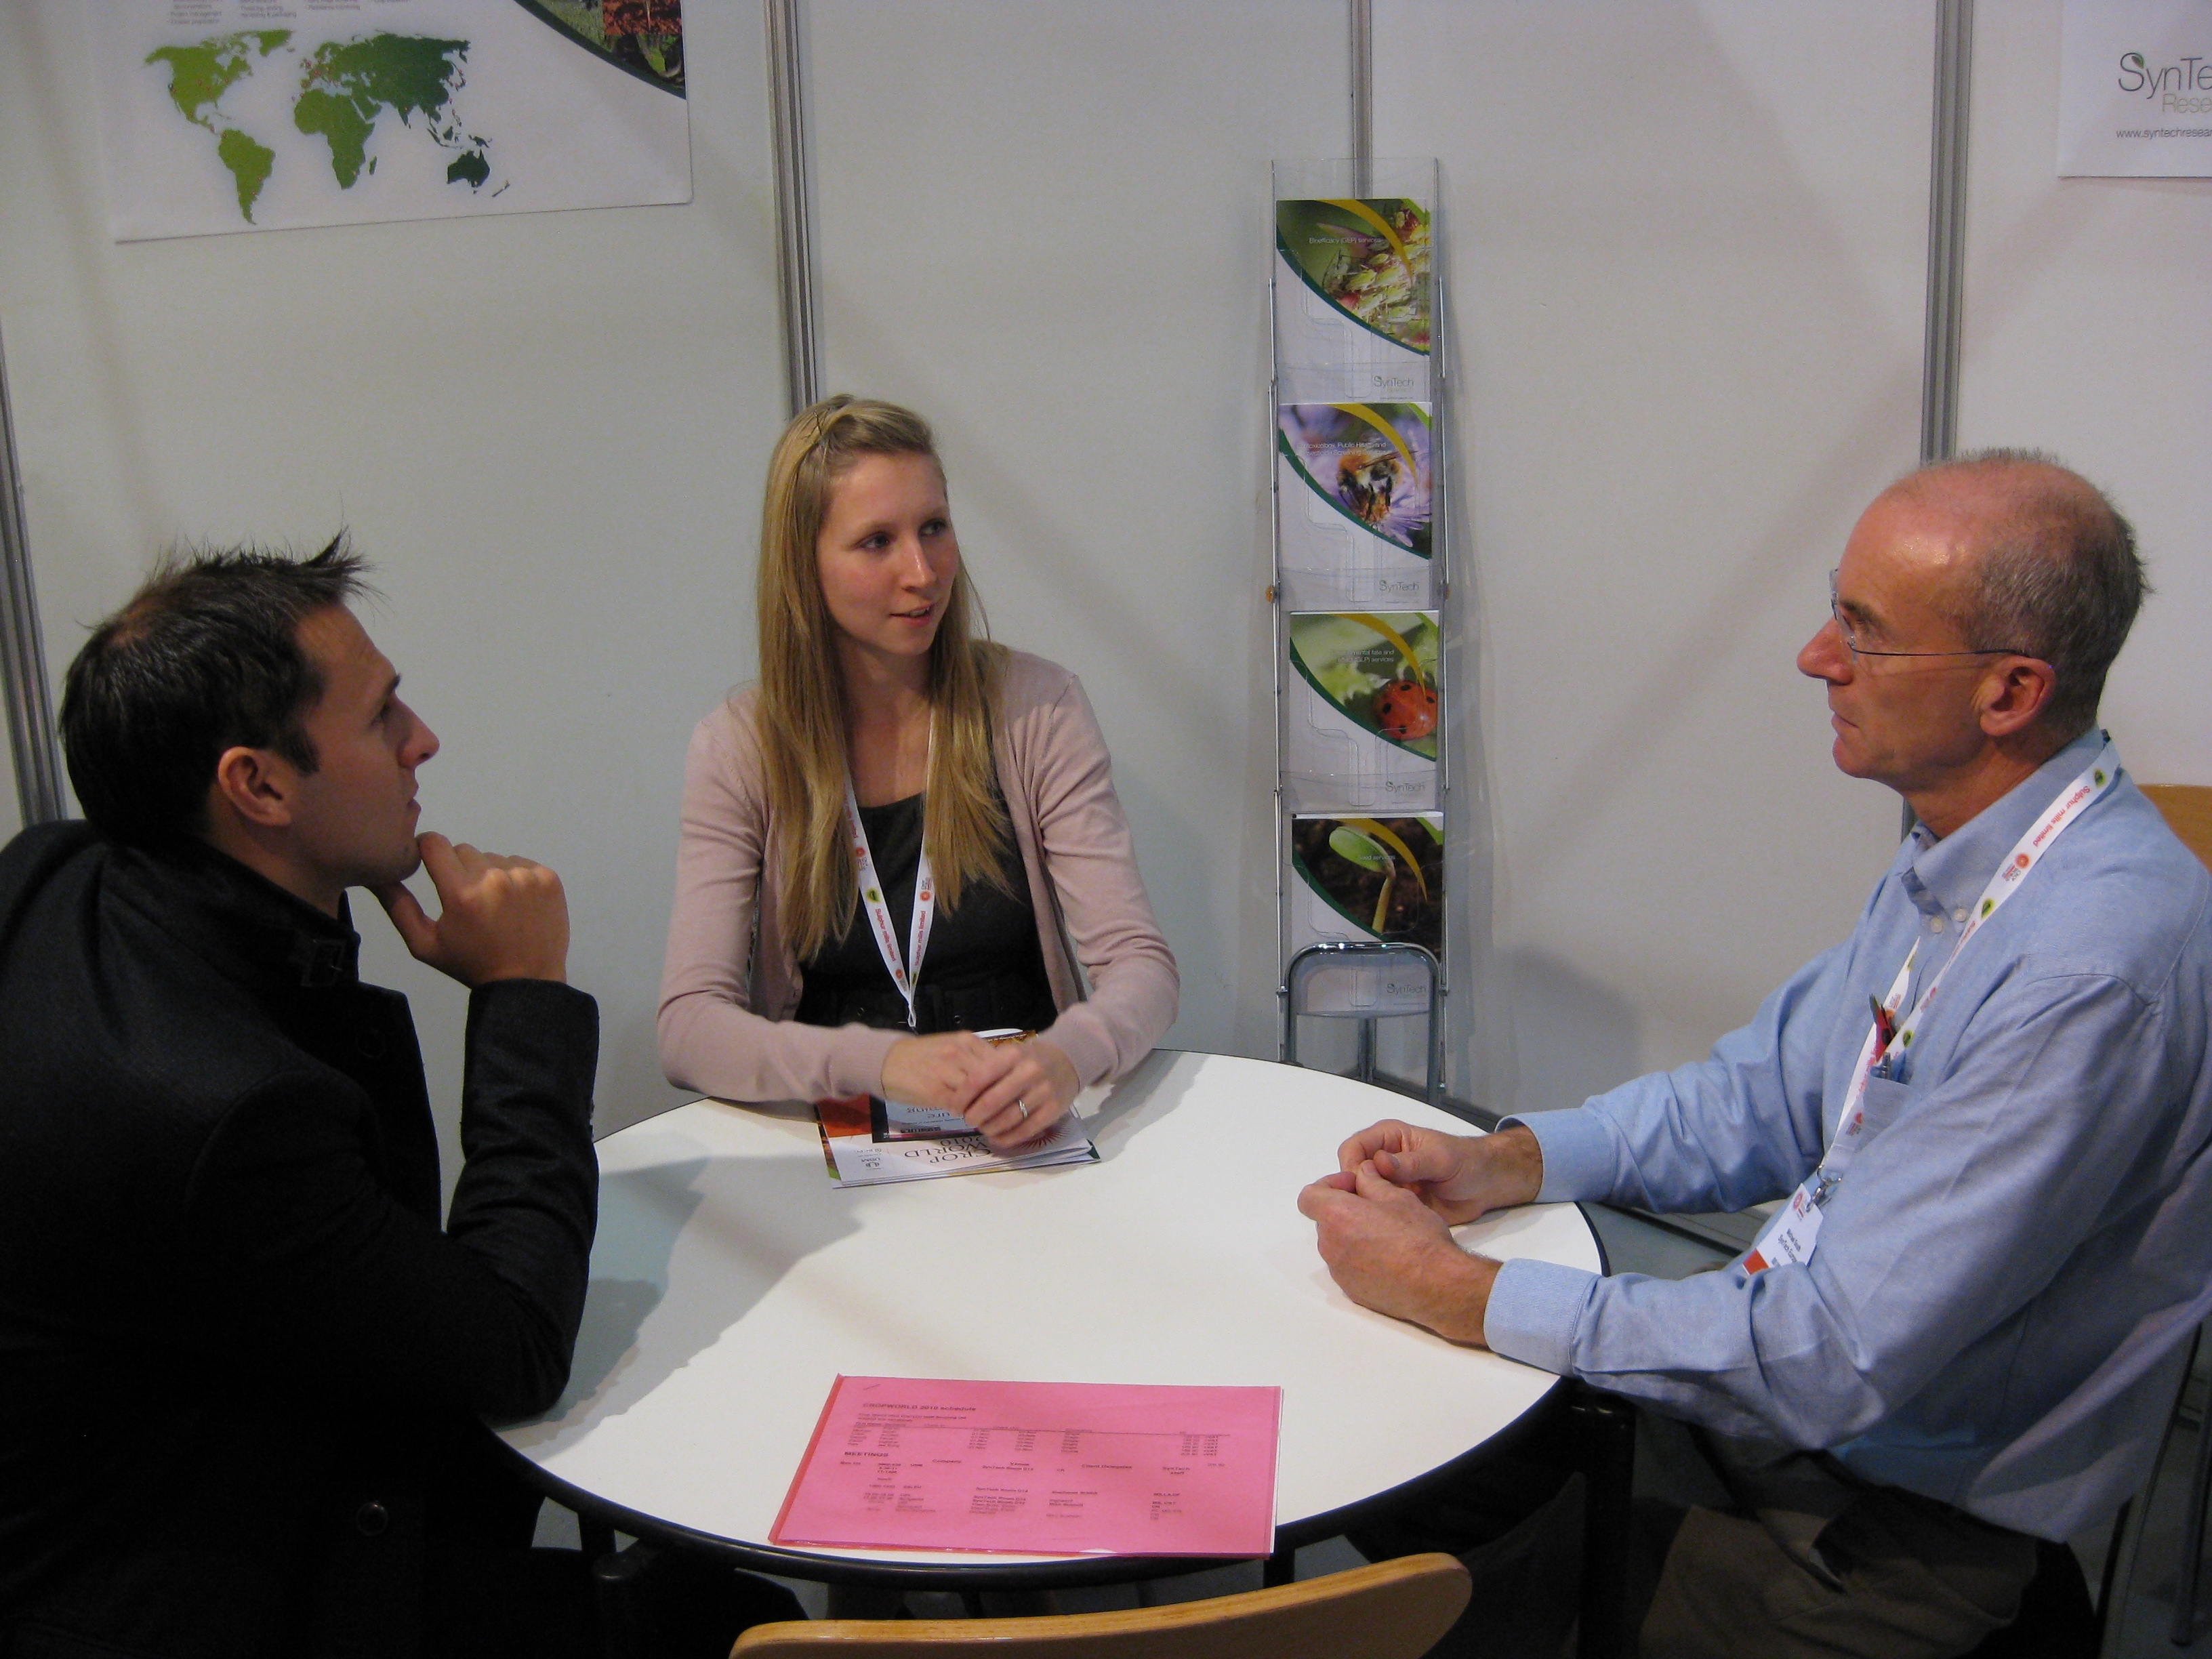 SynTech Specialist Services launched at CropWorld 2010